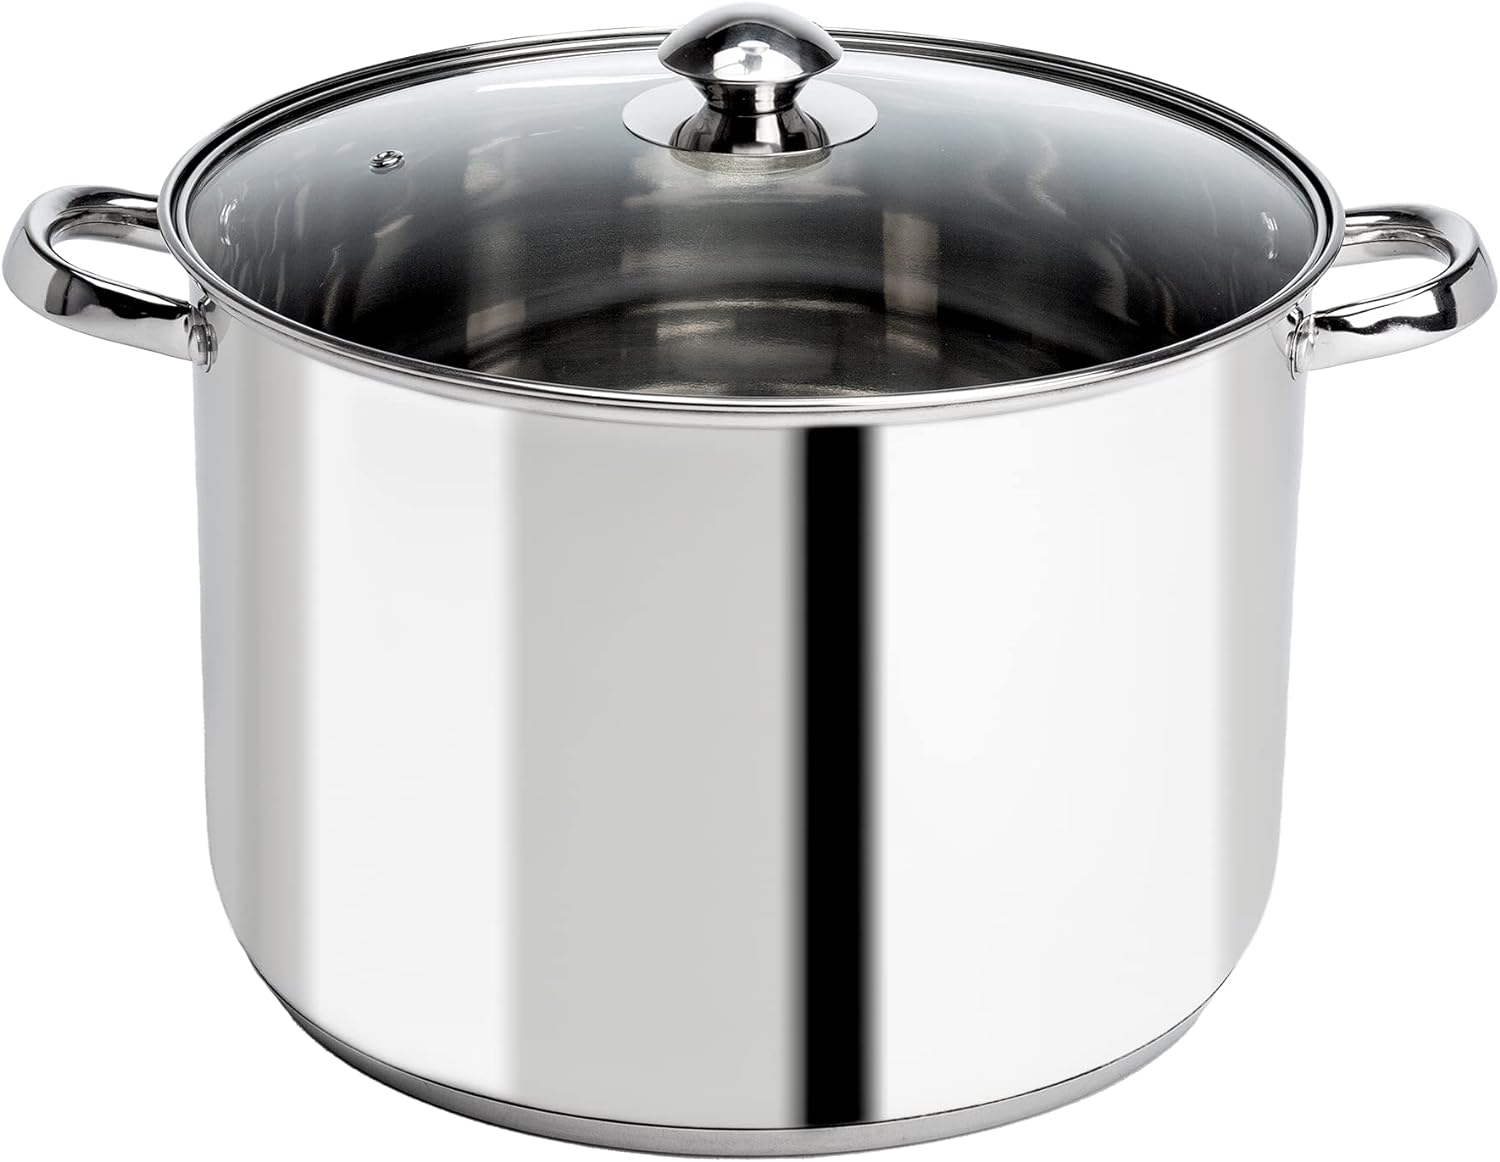 https://bigbigmart.com/wp-content/uploads/2023/11/Ecolution-Stainless-Steel-Stock-Pot-with-Encapsulated-Bottom-Matching-Tempered-Glass-Steam-Vented-Lids-Made-Without-PFOA-Dishwasher-Safe-12-Quart-Silver.jpg